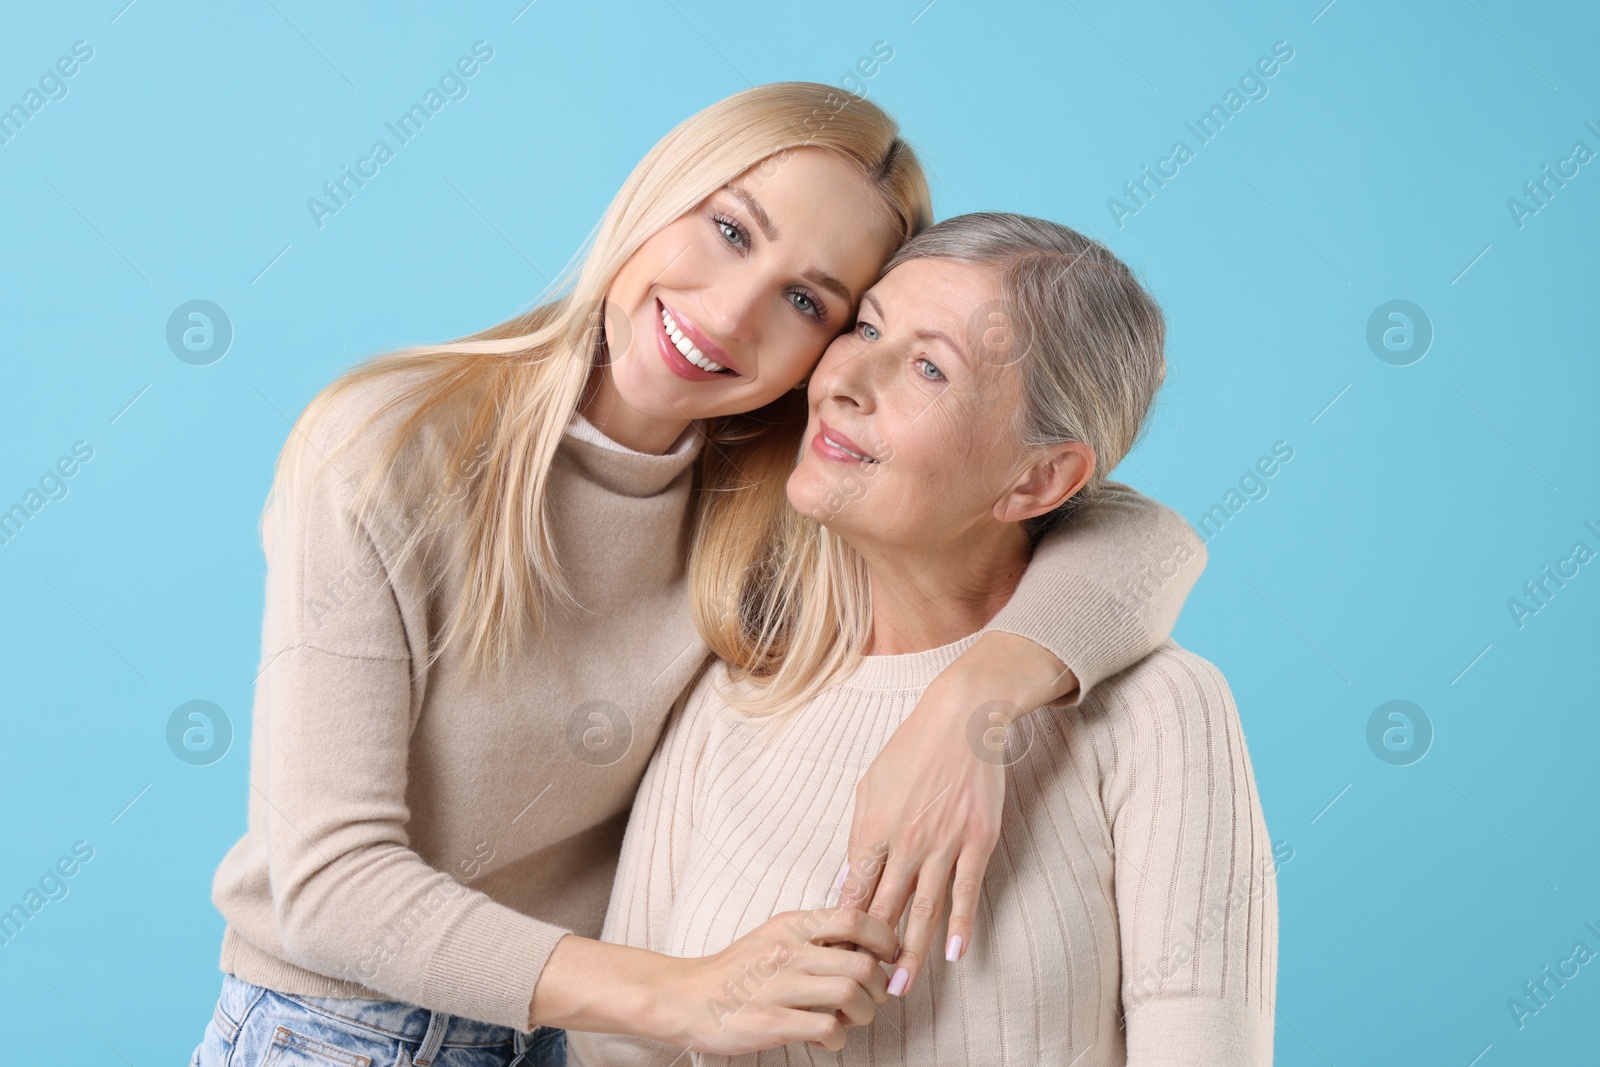 Photo of Family portrait of young woman and her mother on light blue background